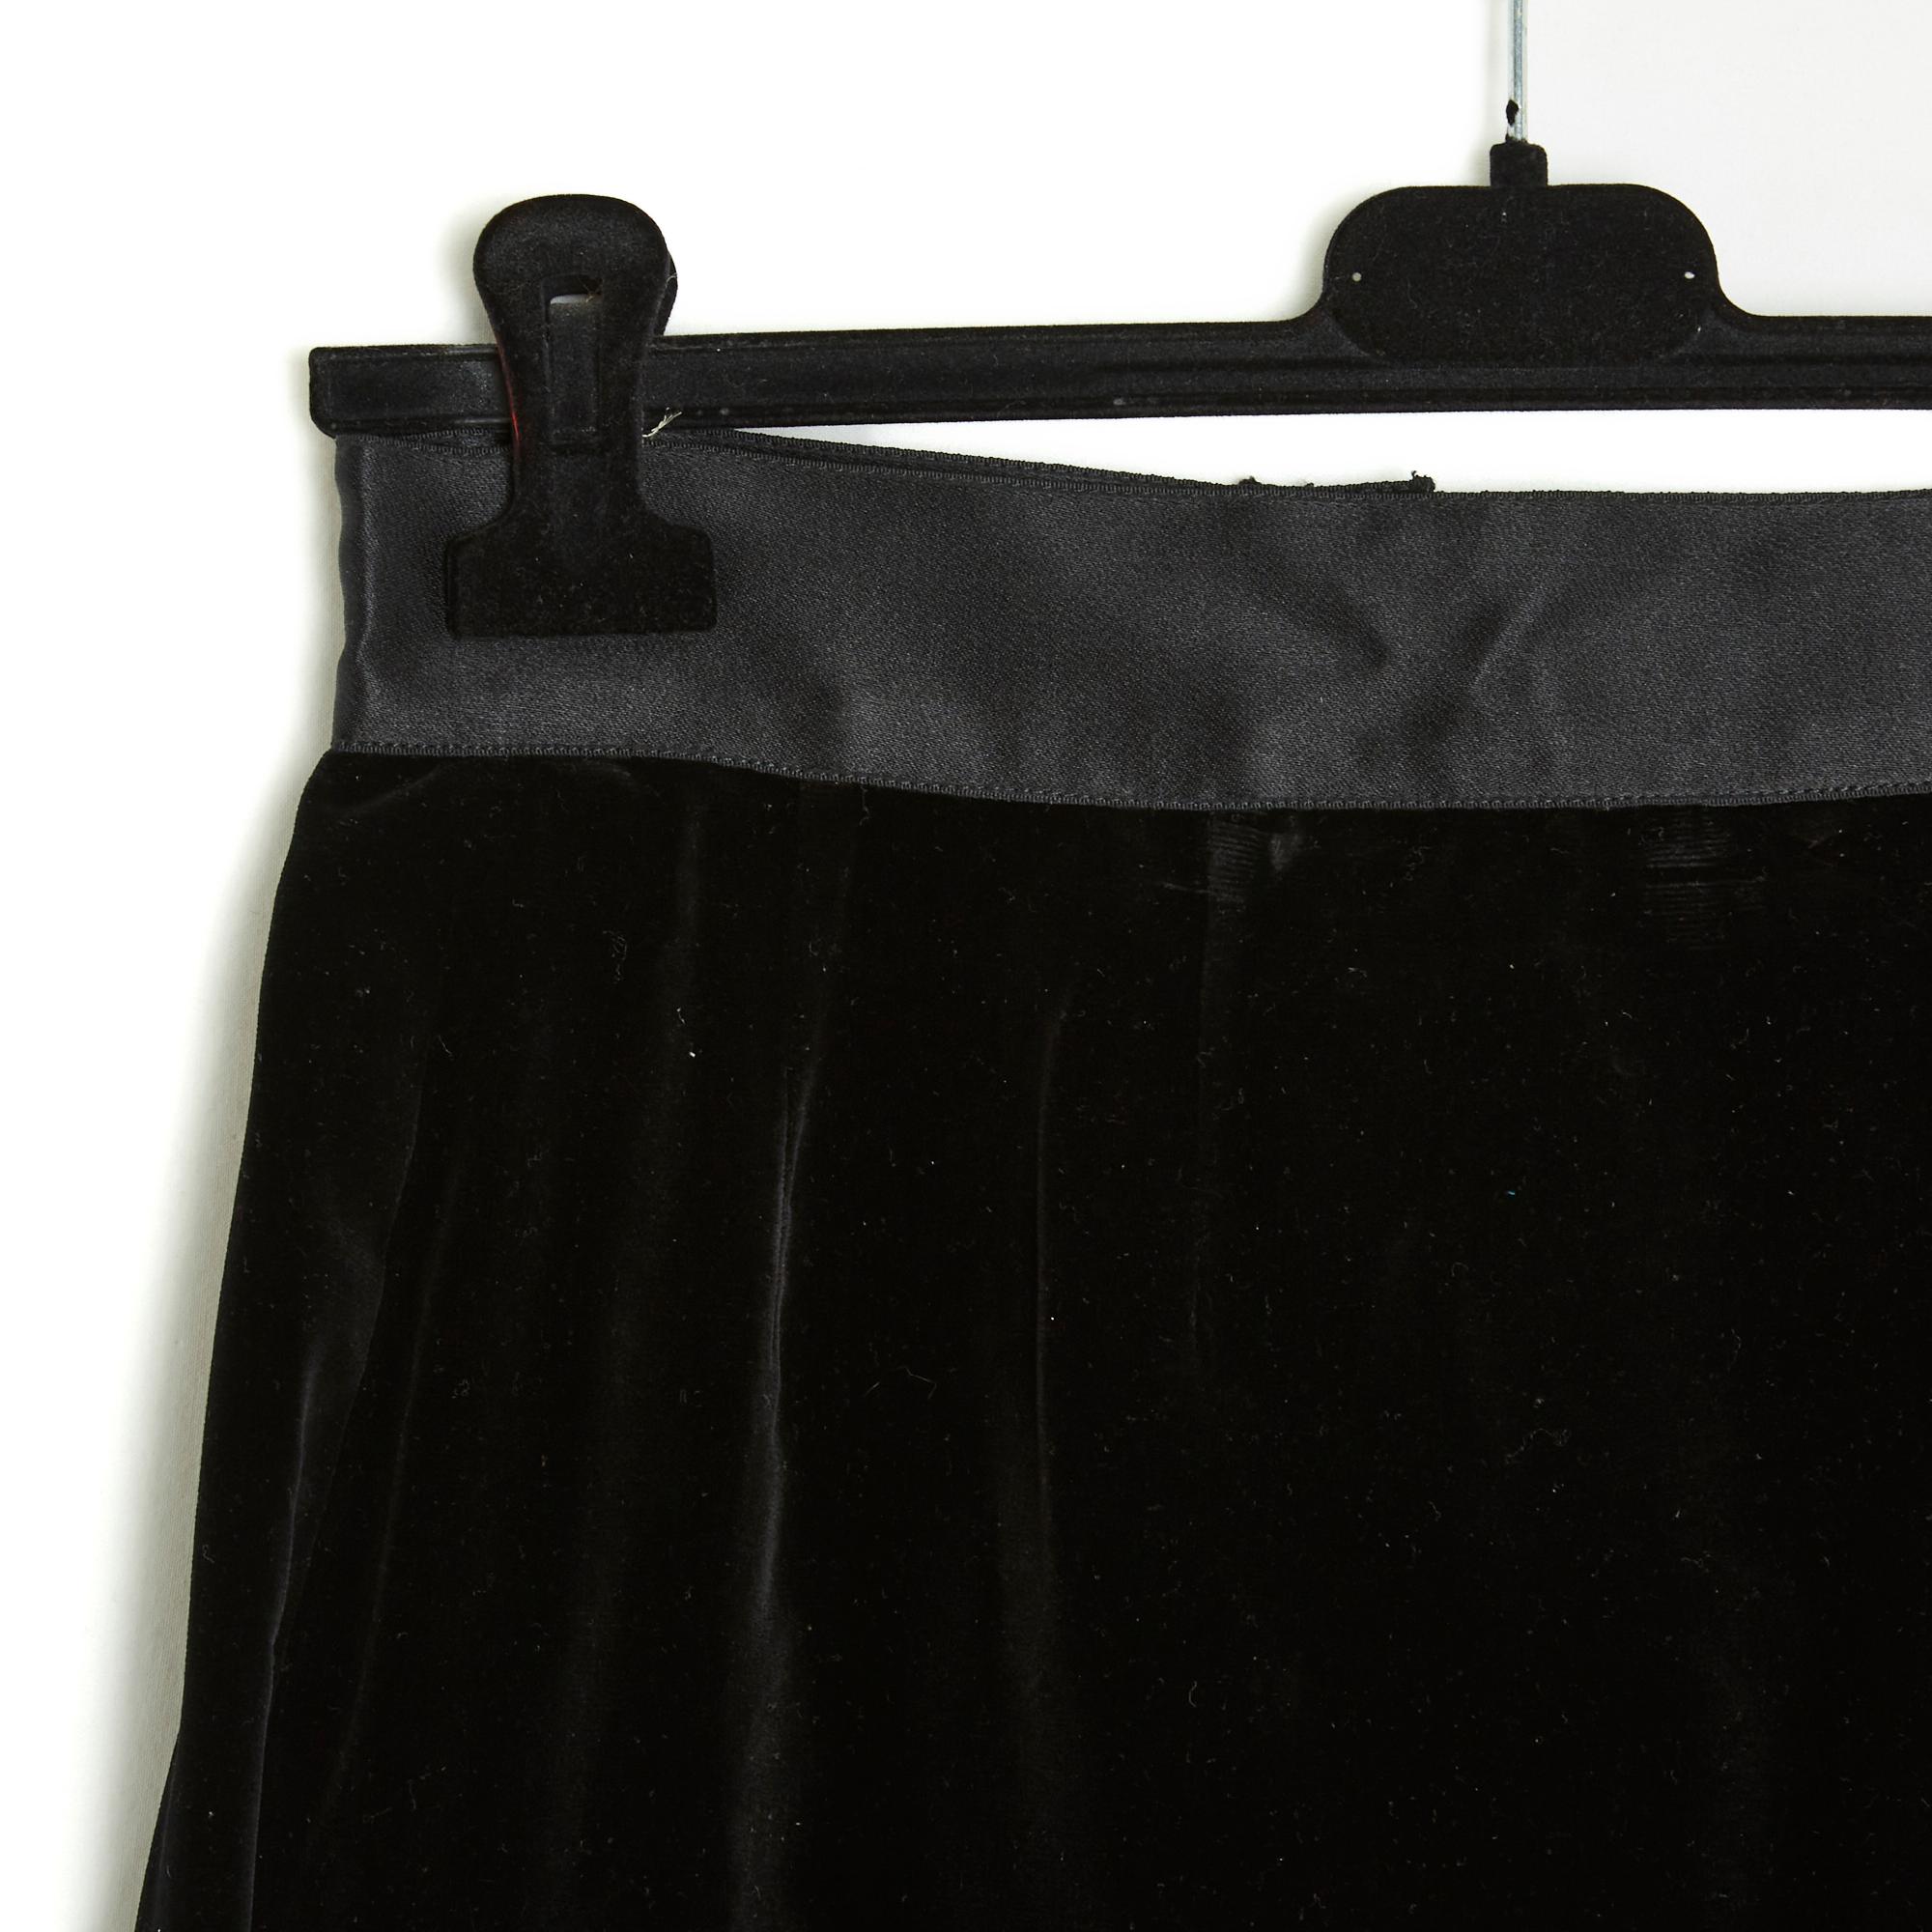 Chanel circa 1990 mid-length straight skirt in smooth black cotton and silk velvet, silk satin belt on high waist, zip closure and several hooks, matching silk lining. Please note size 40FR but the measurements indicate a 36FR: size 35 cm, length 60